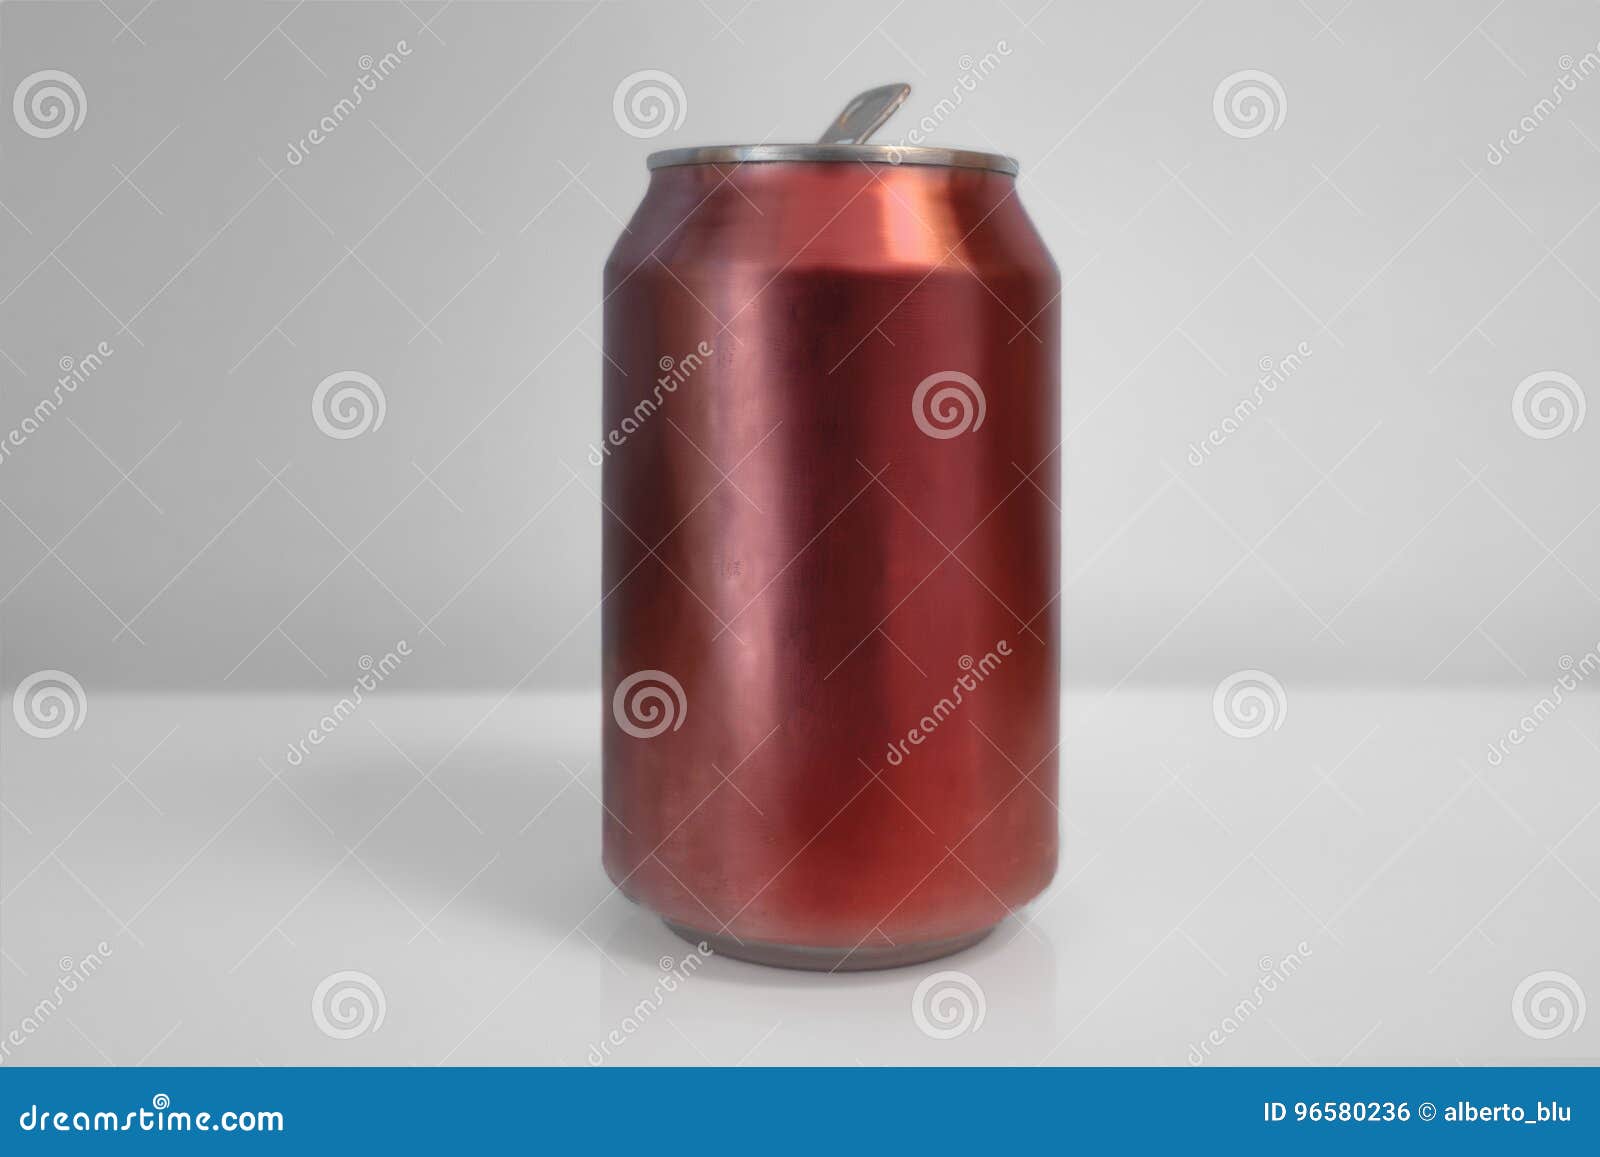 aluminum red soda can over white background